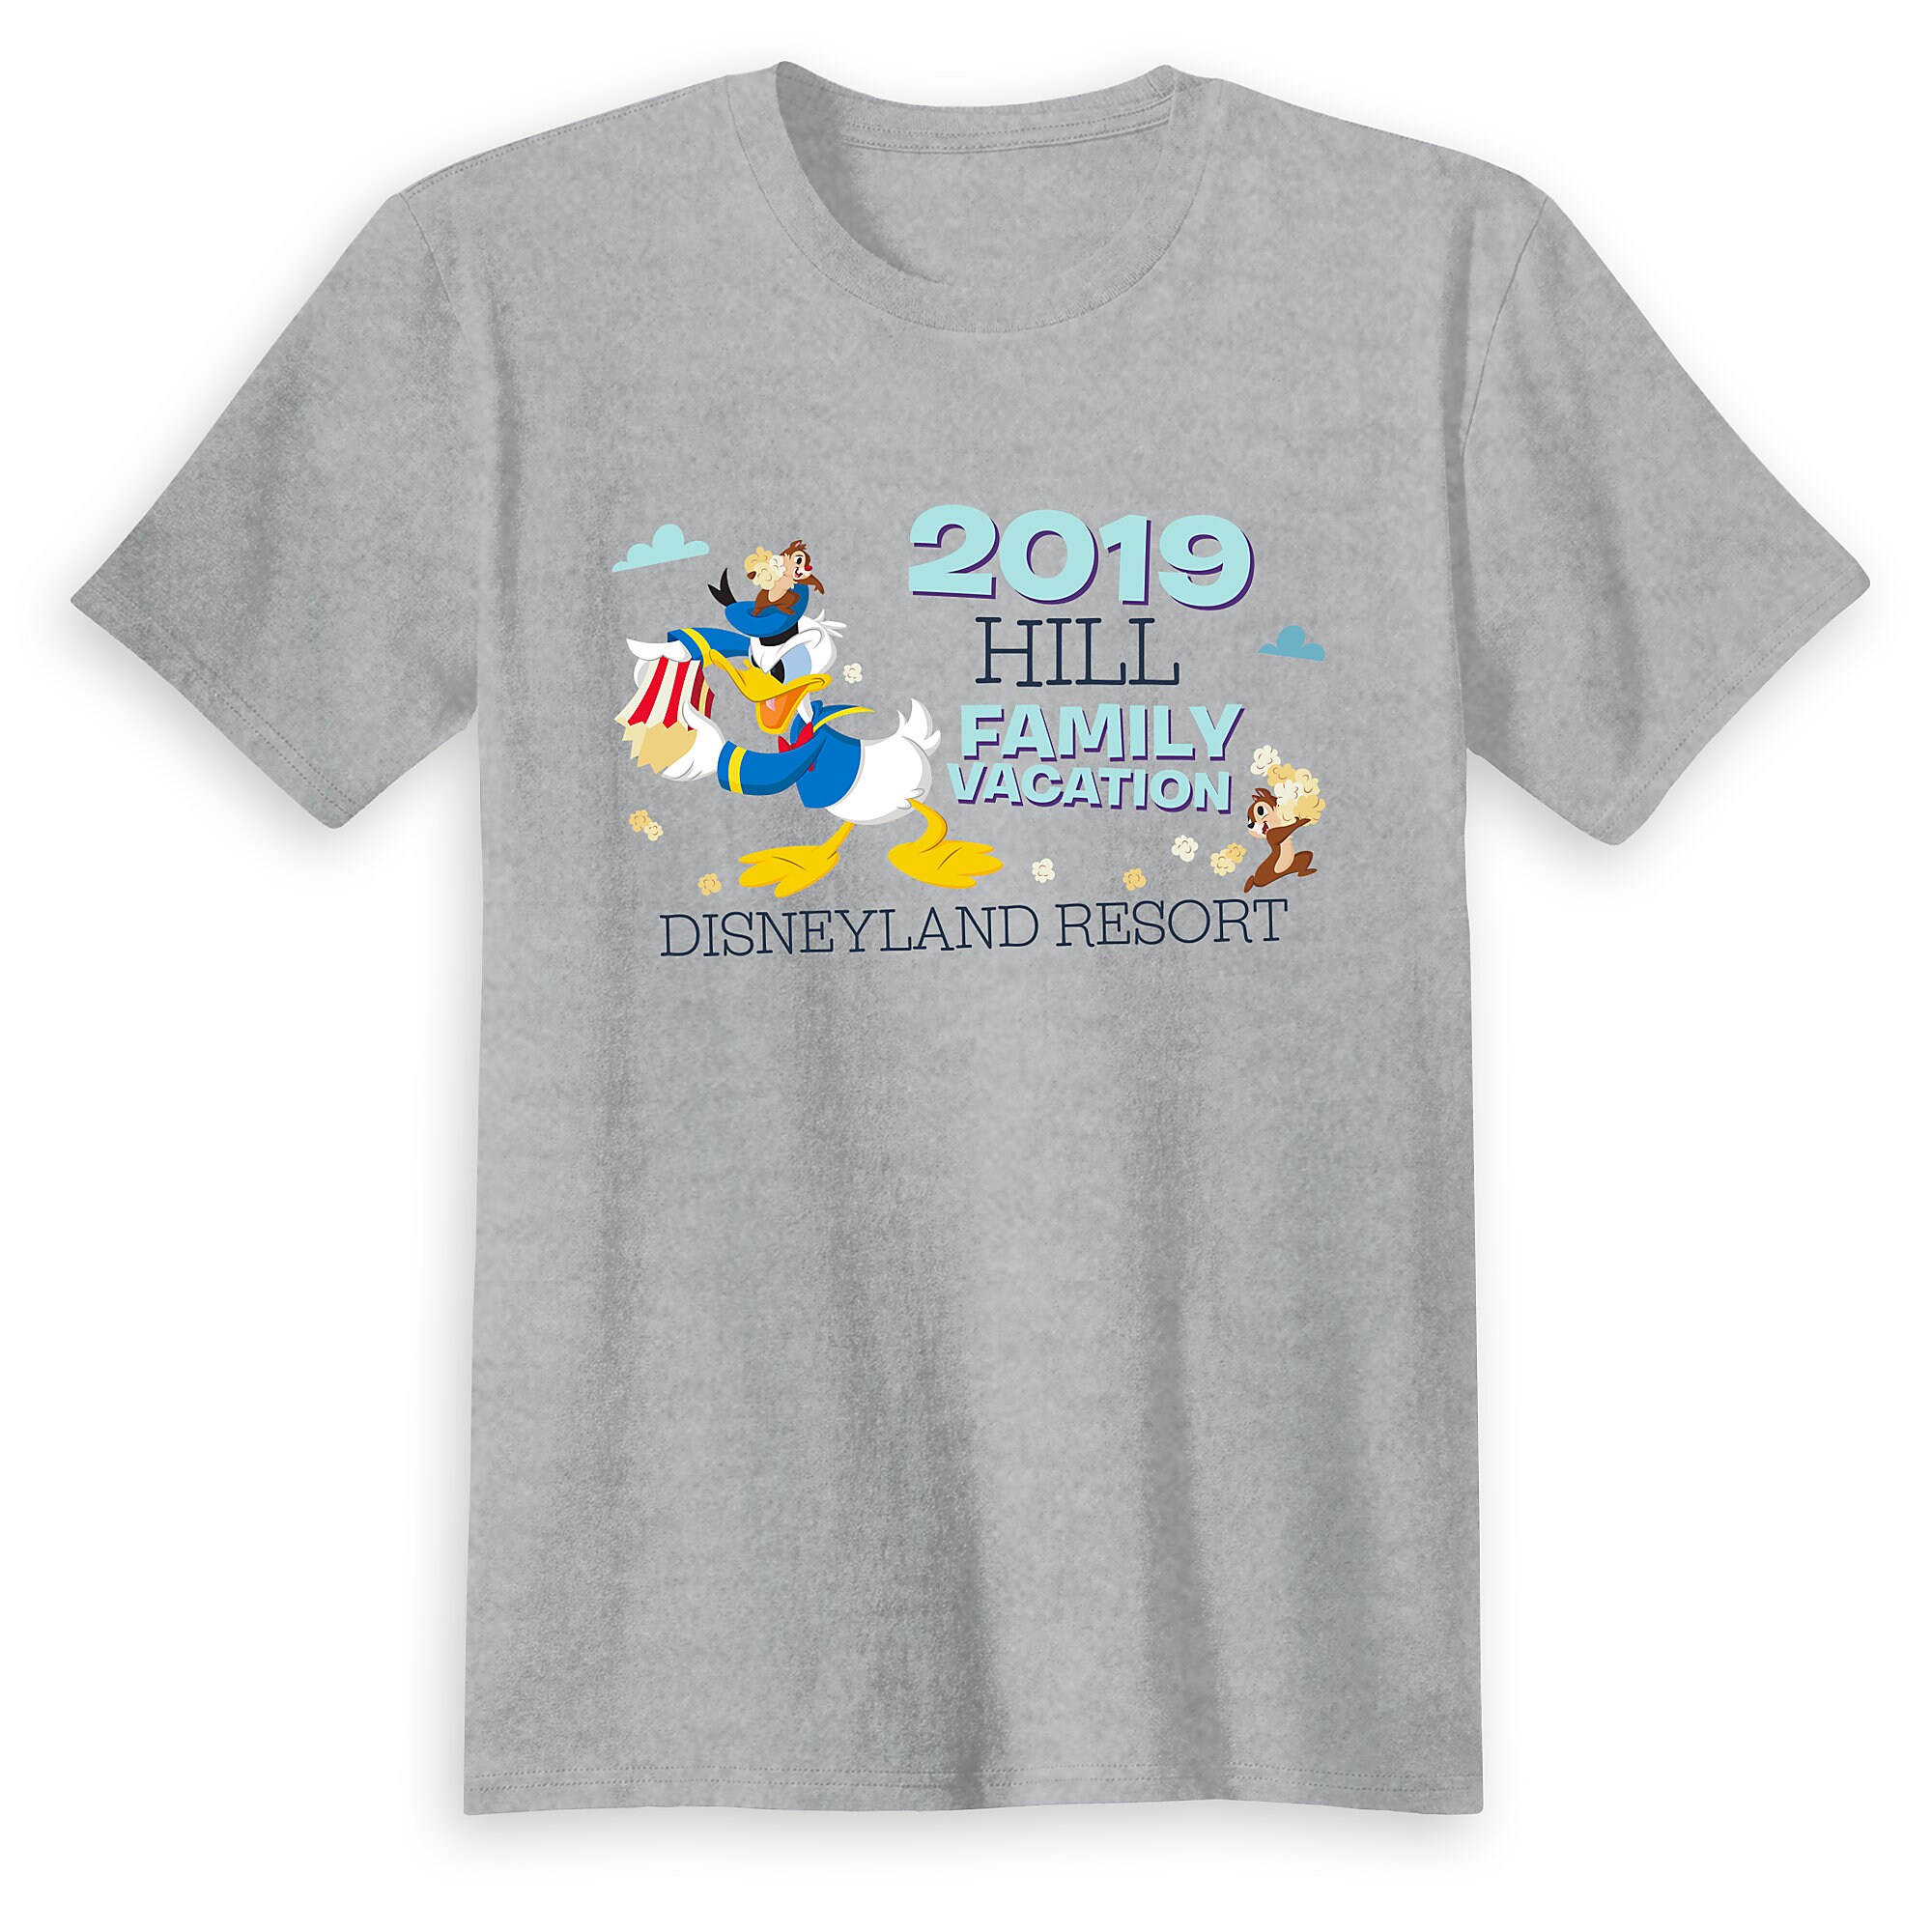 Kids' Donald Duck and Chip 'n Dale Family Vacation T-Shirt - Disneyland Resort - Customized